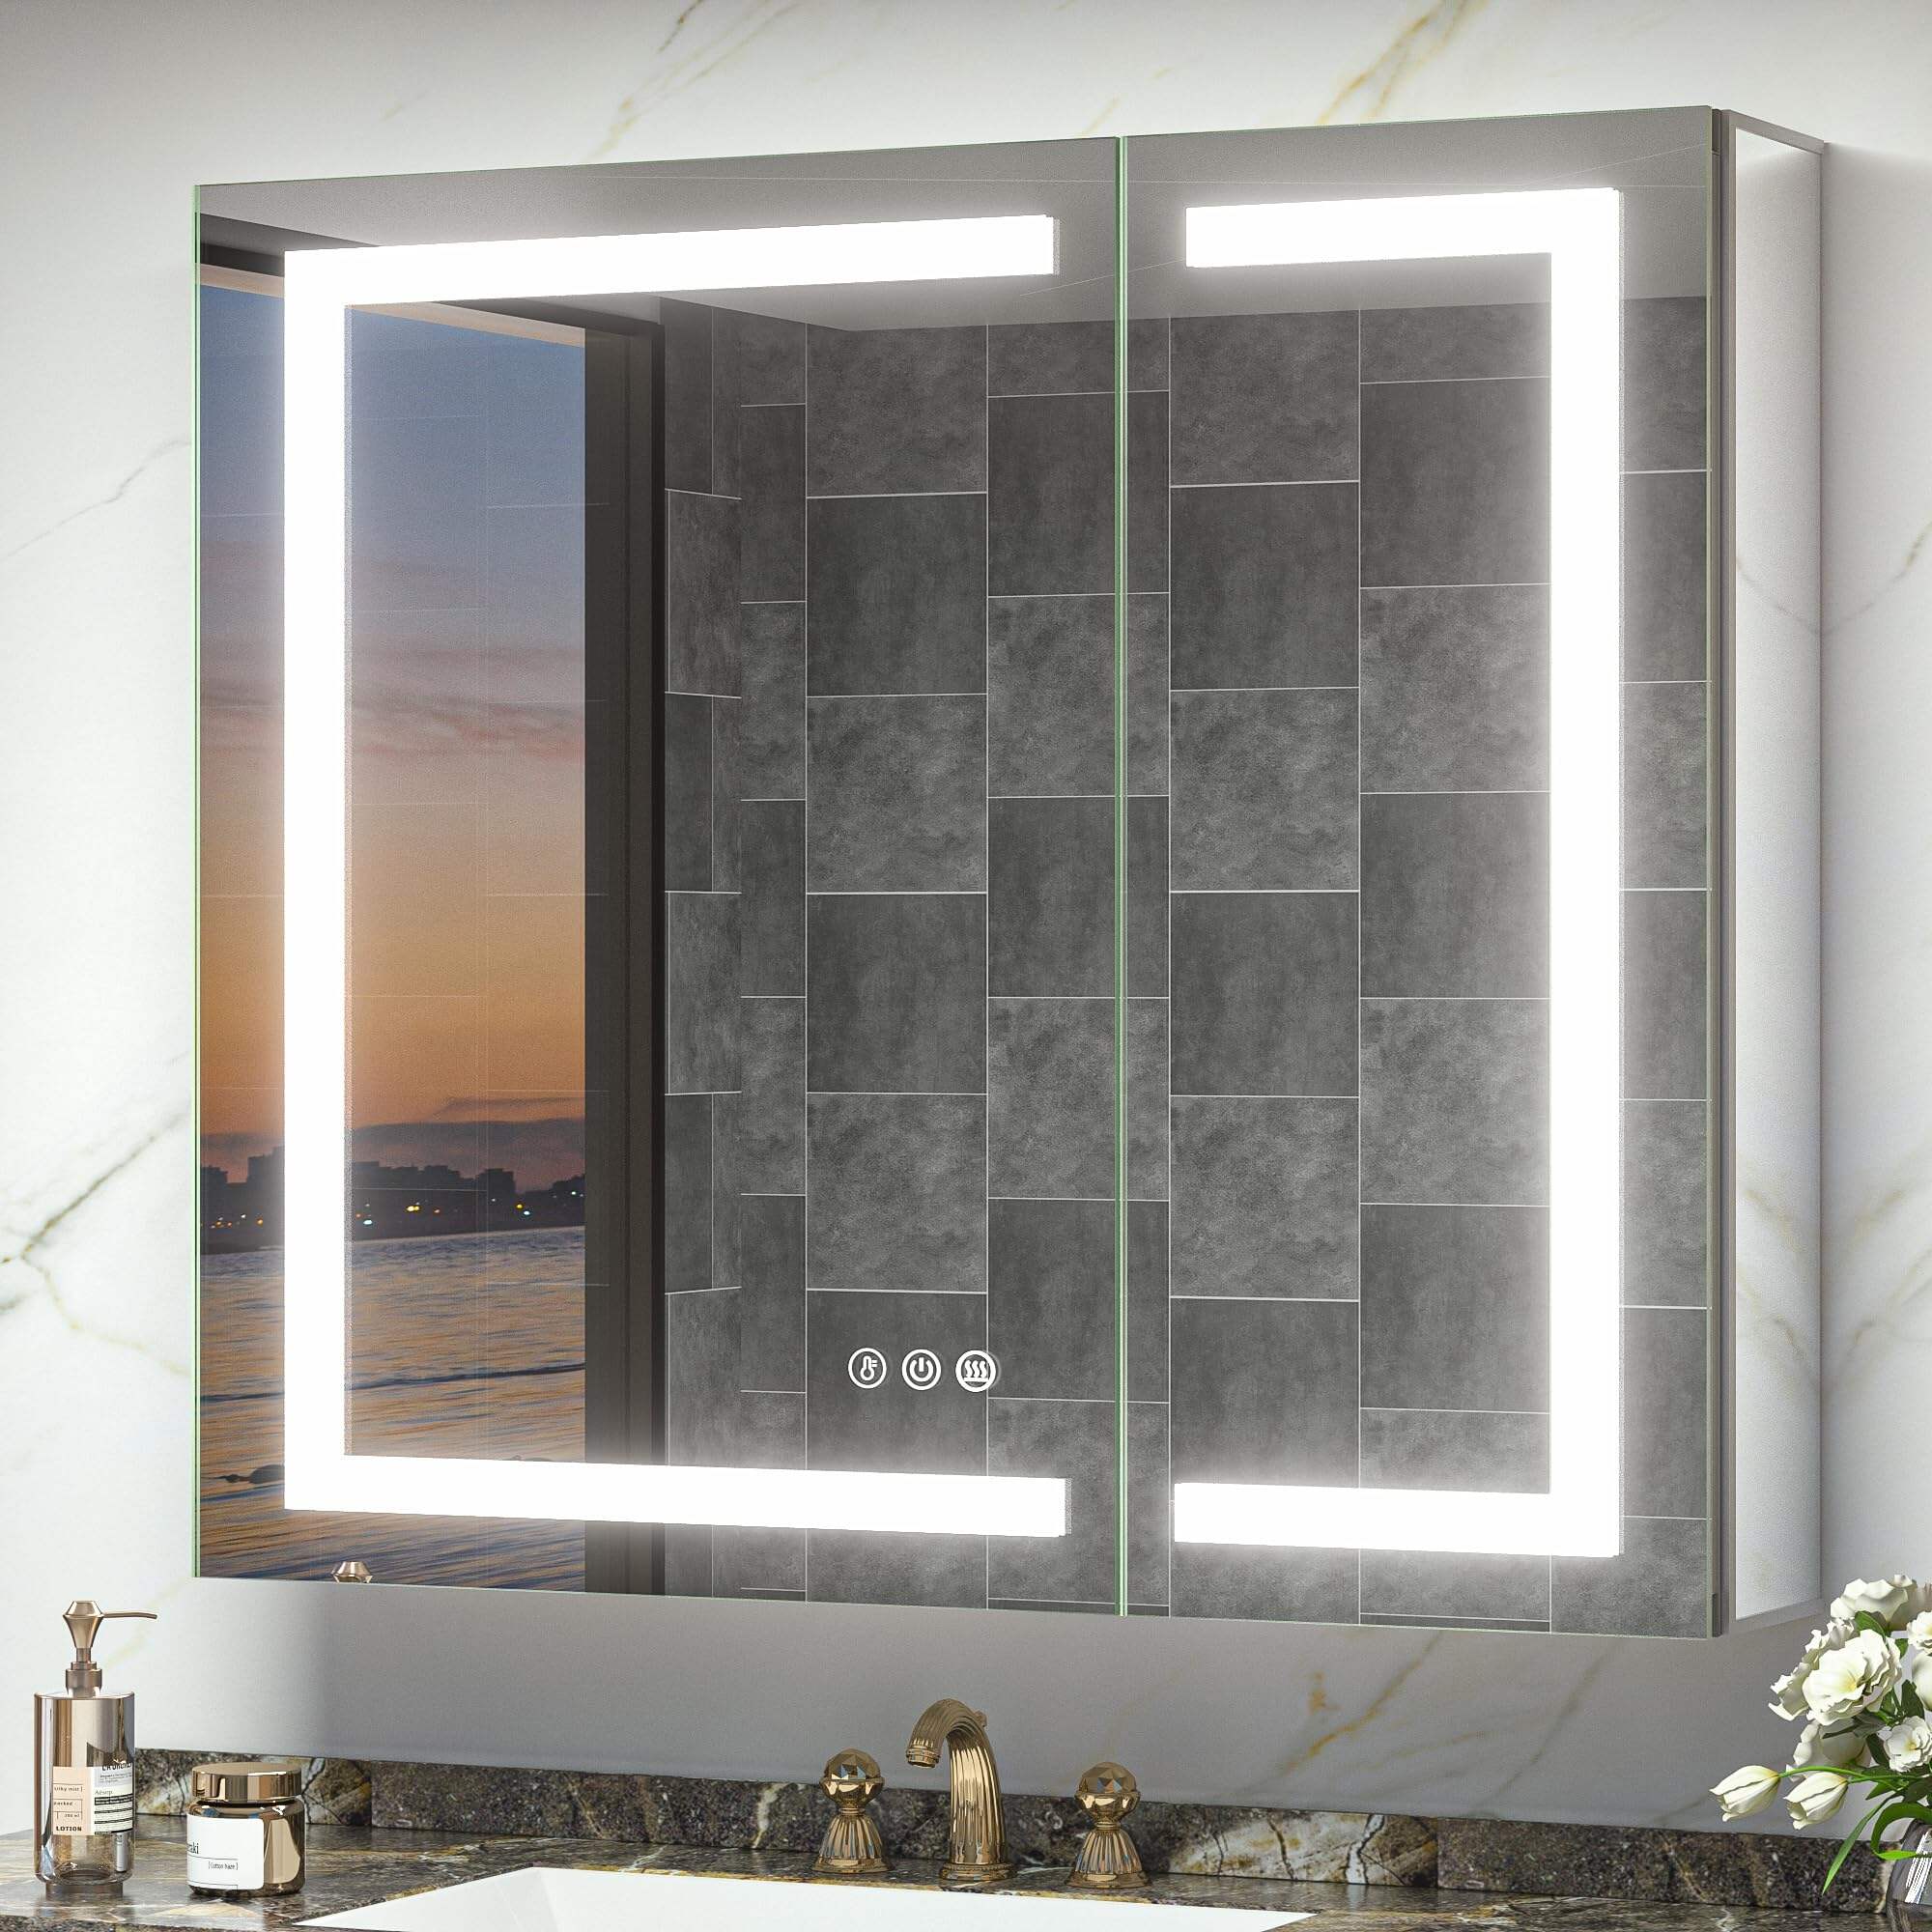 JJGullit bathroom mirror supplier 36x32 Lighted Medicine Cabinet with Mirror, Electrical Outlet, Frontlit Anti-Fog 3 Colors Temperature Dimmable Surface or Recessed Mount for Bathroom Vanity and Modern Decor